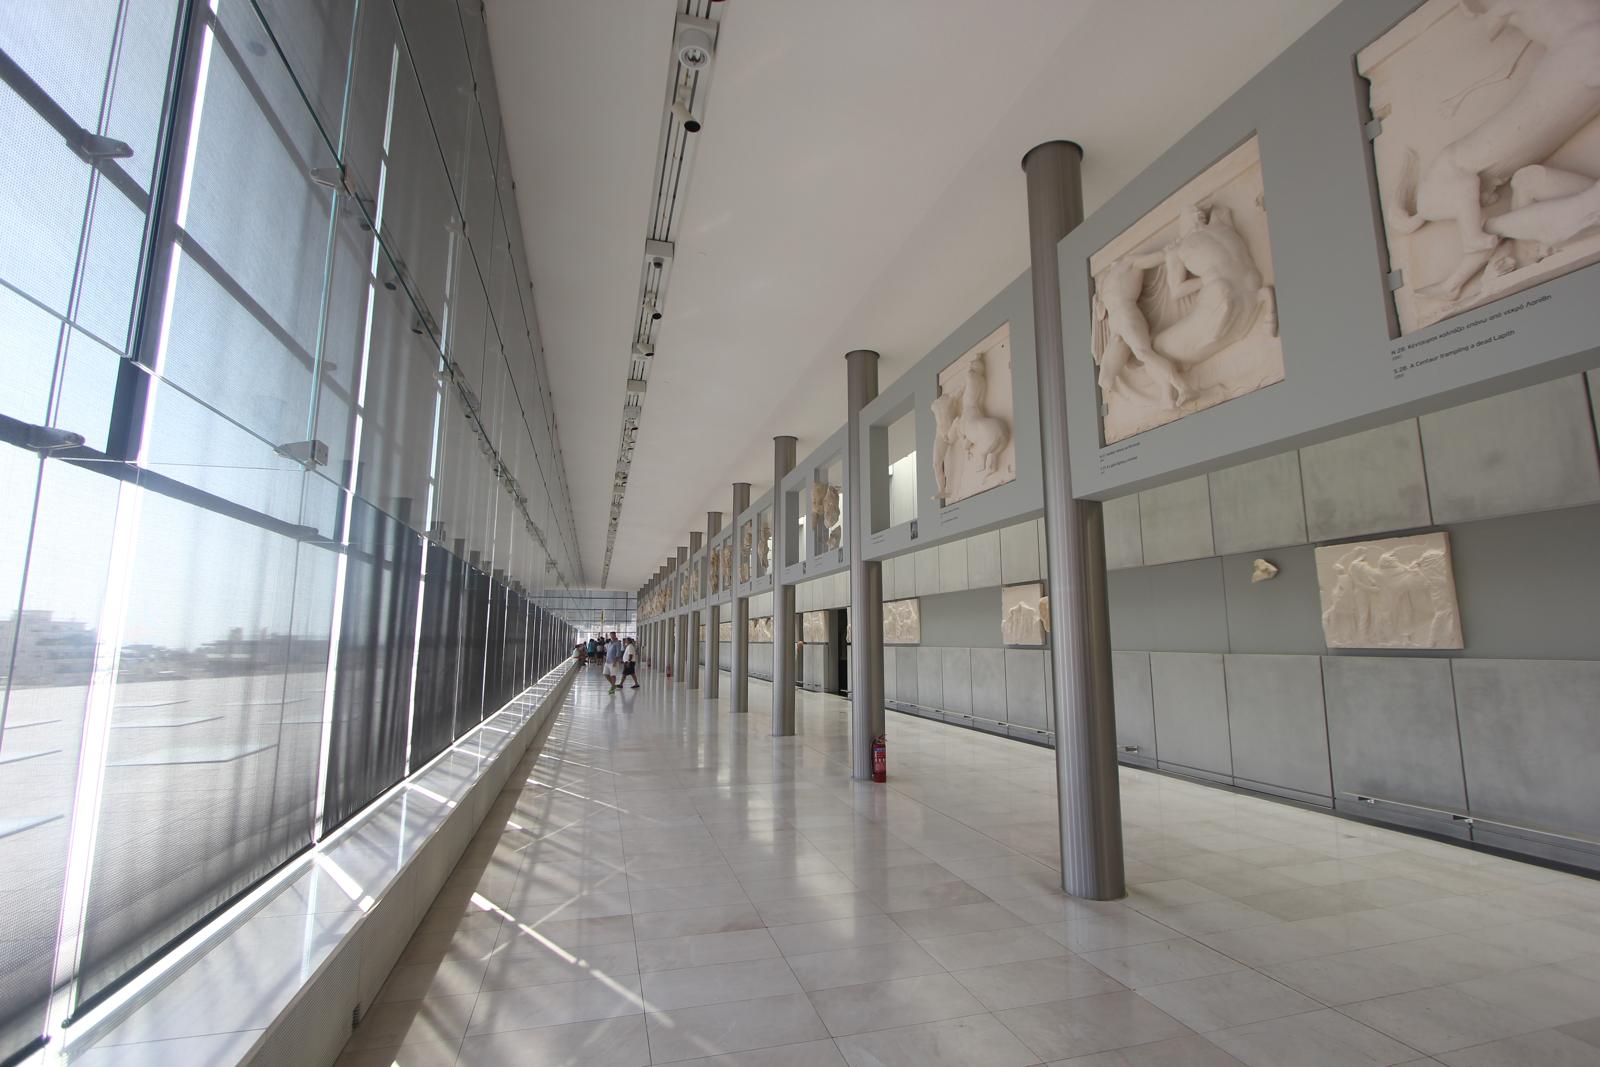 The Parthenon Museum: The Marbles